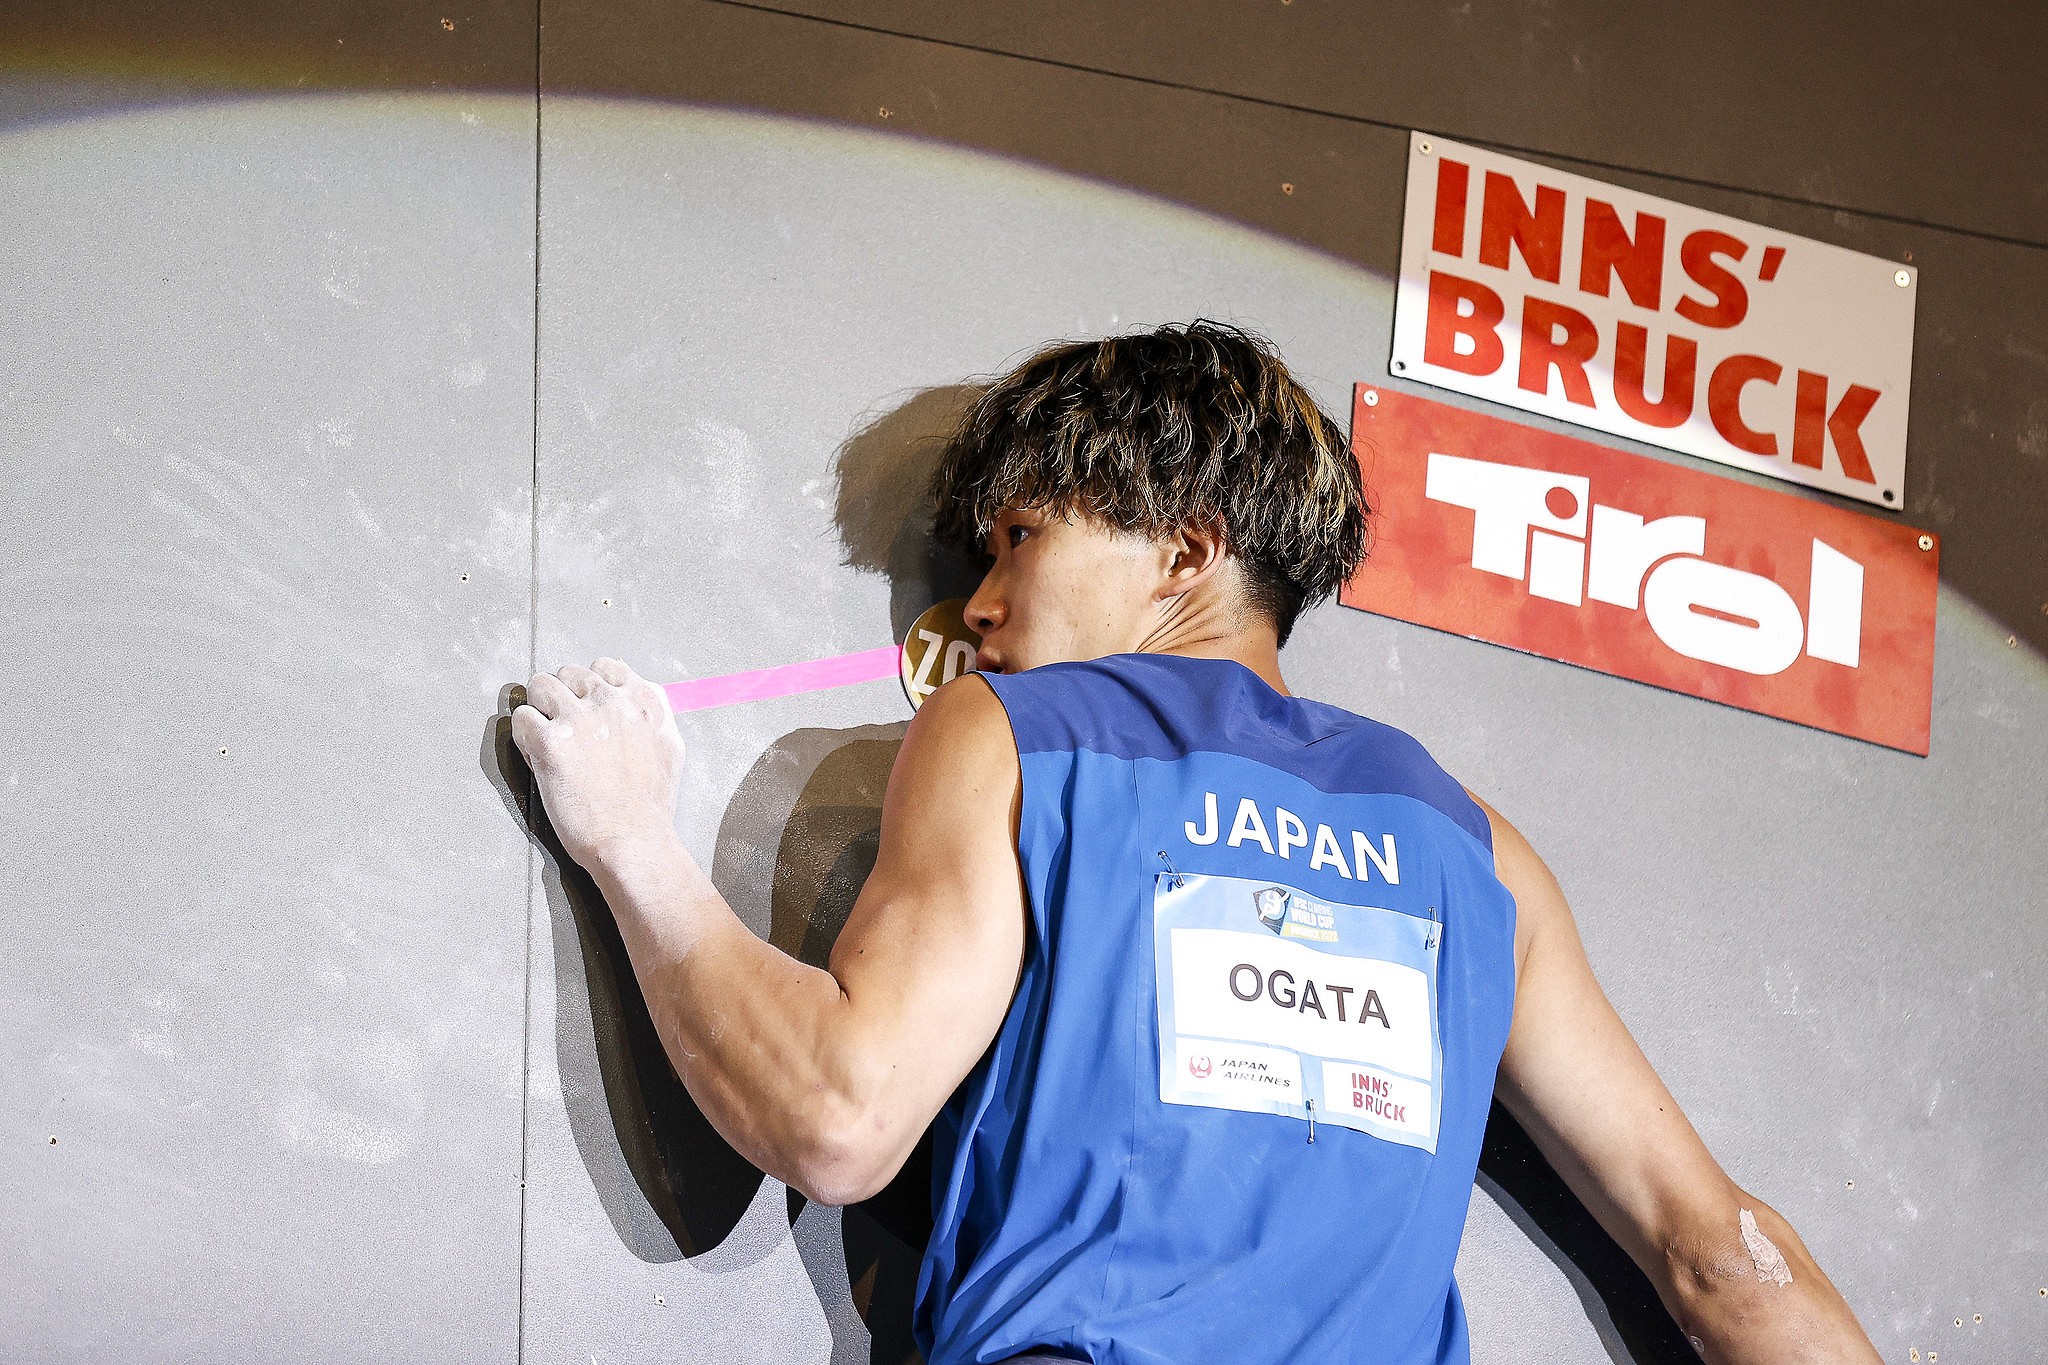 Yoshiyuki Ogata clinched the overall title with a second place in Innsbruck.  © Dimitris Tosidis/IFSC